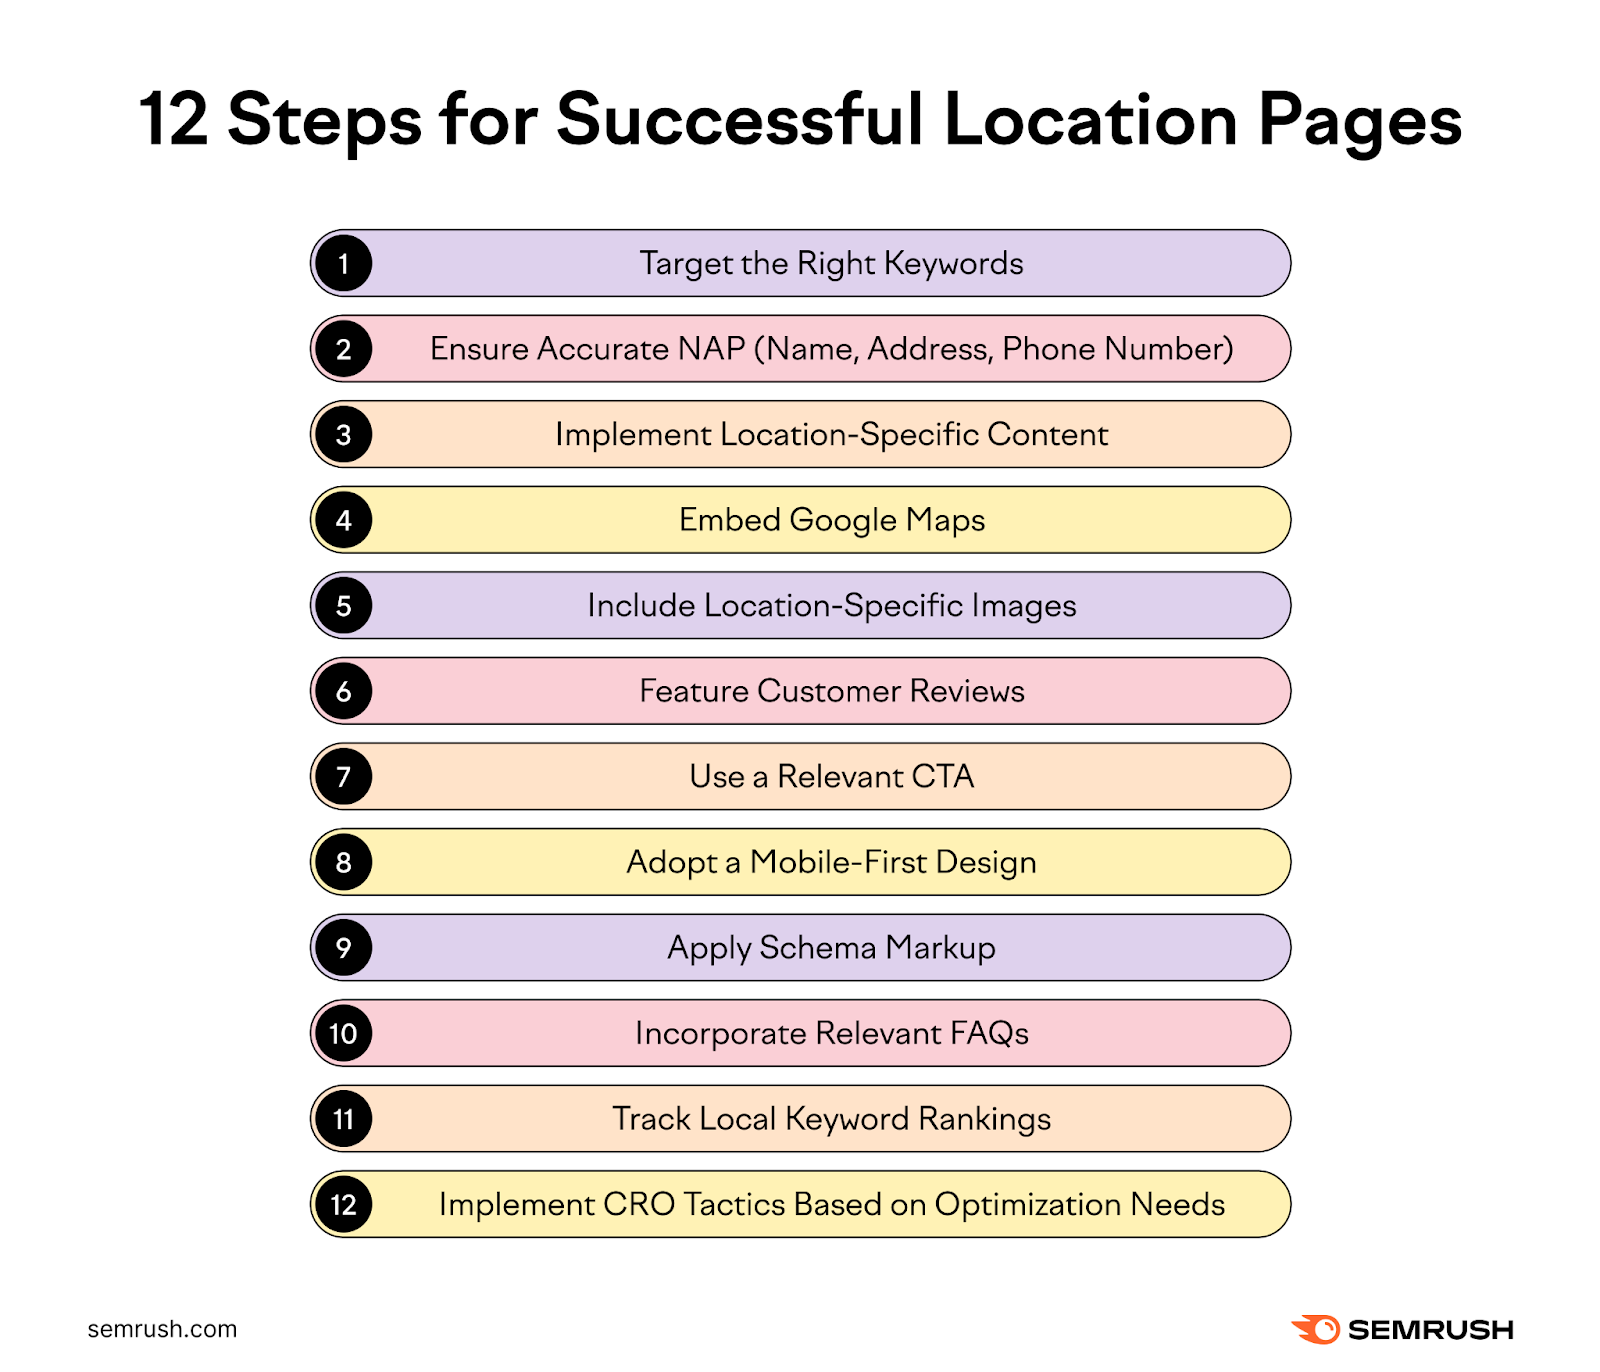 An infographic by Semrush listing 12 steps for successful location pages